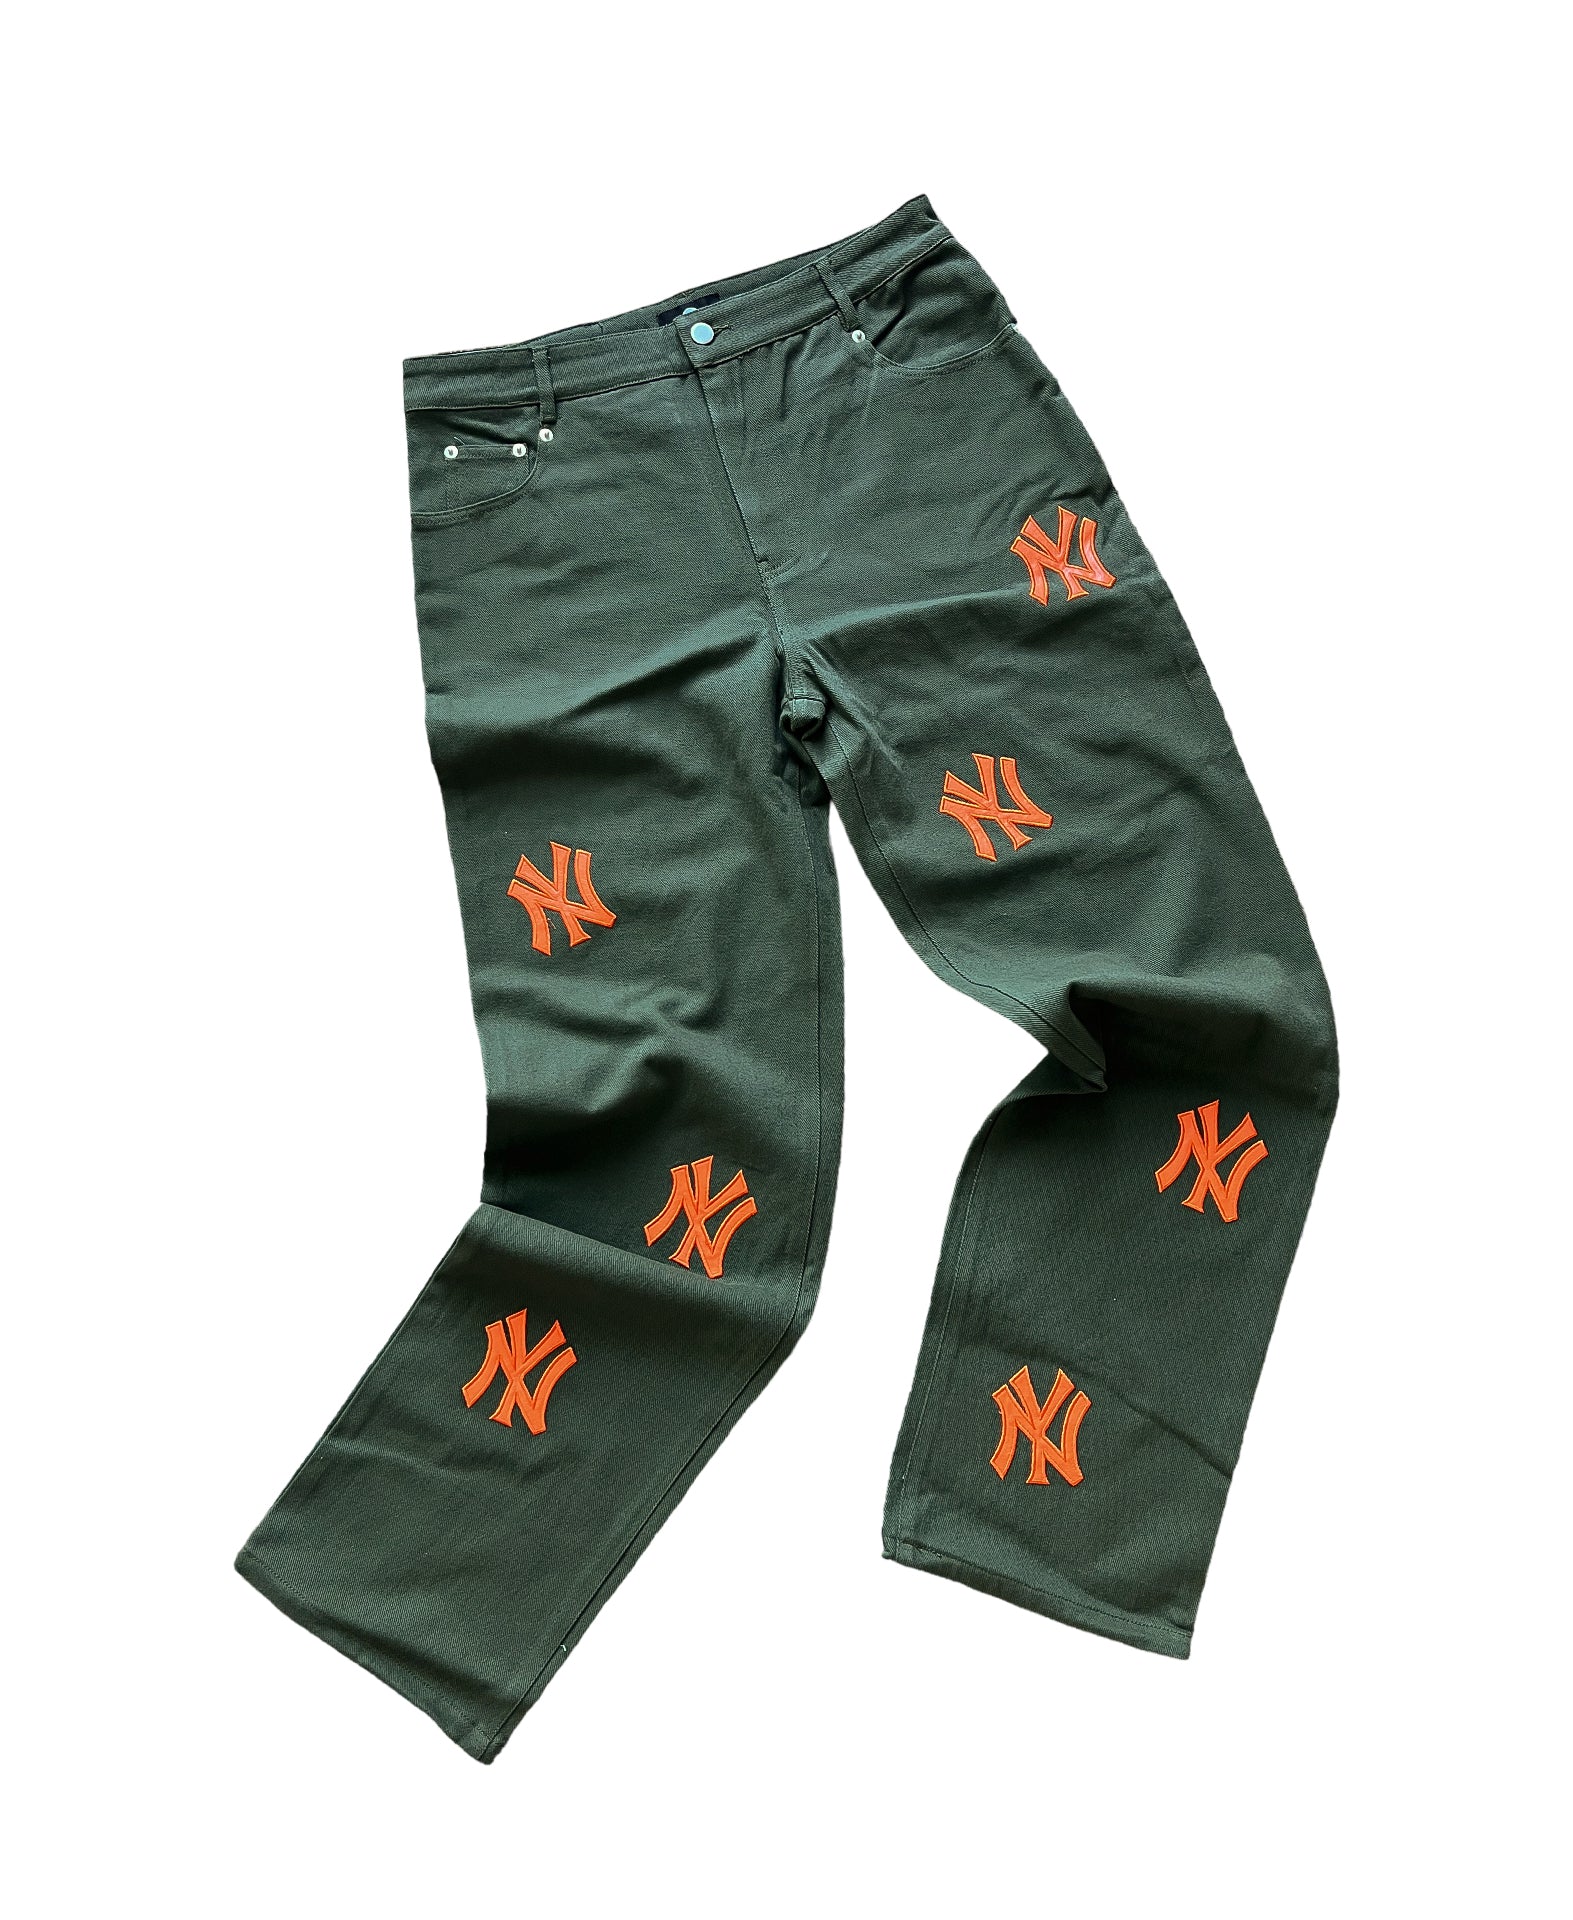 New York Patch Jeans - Green